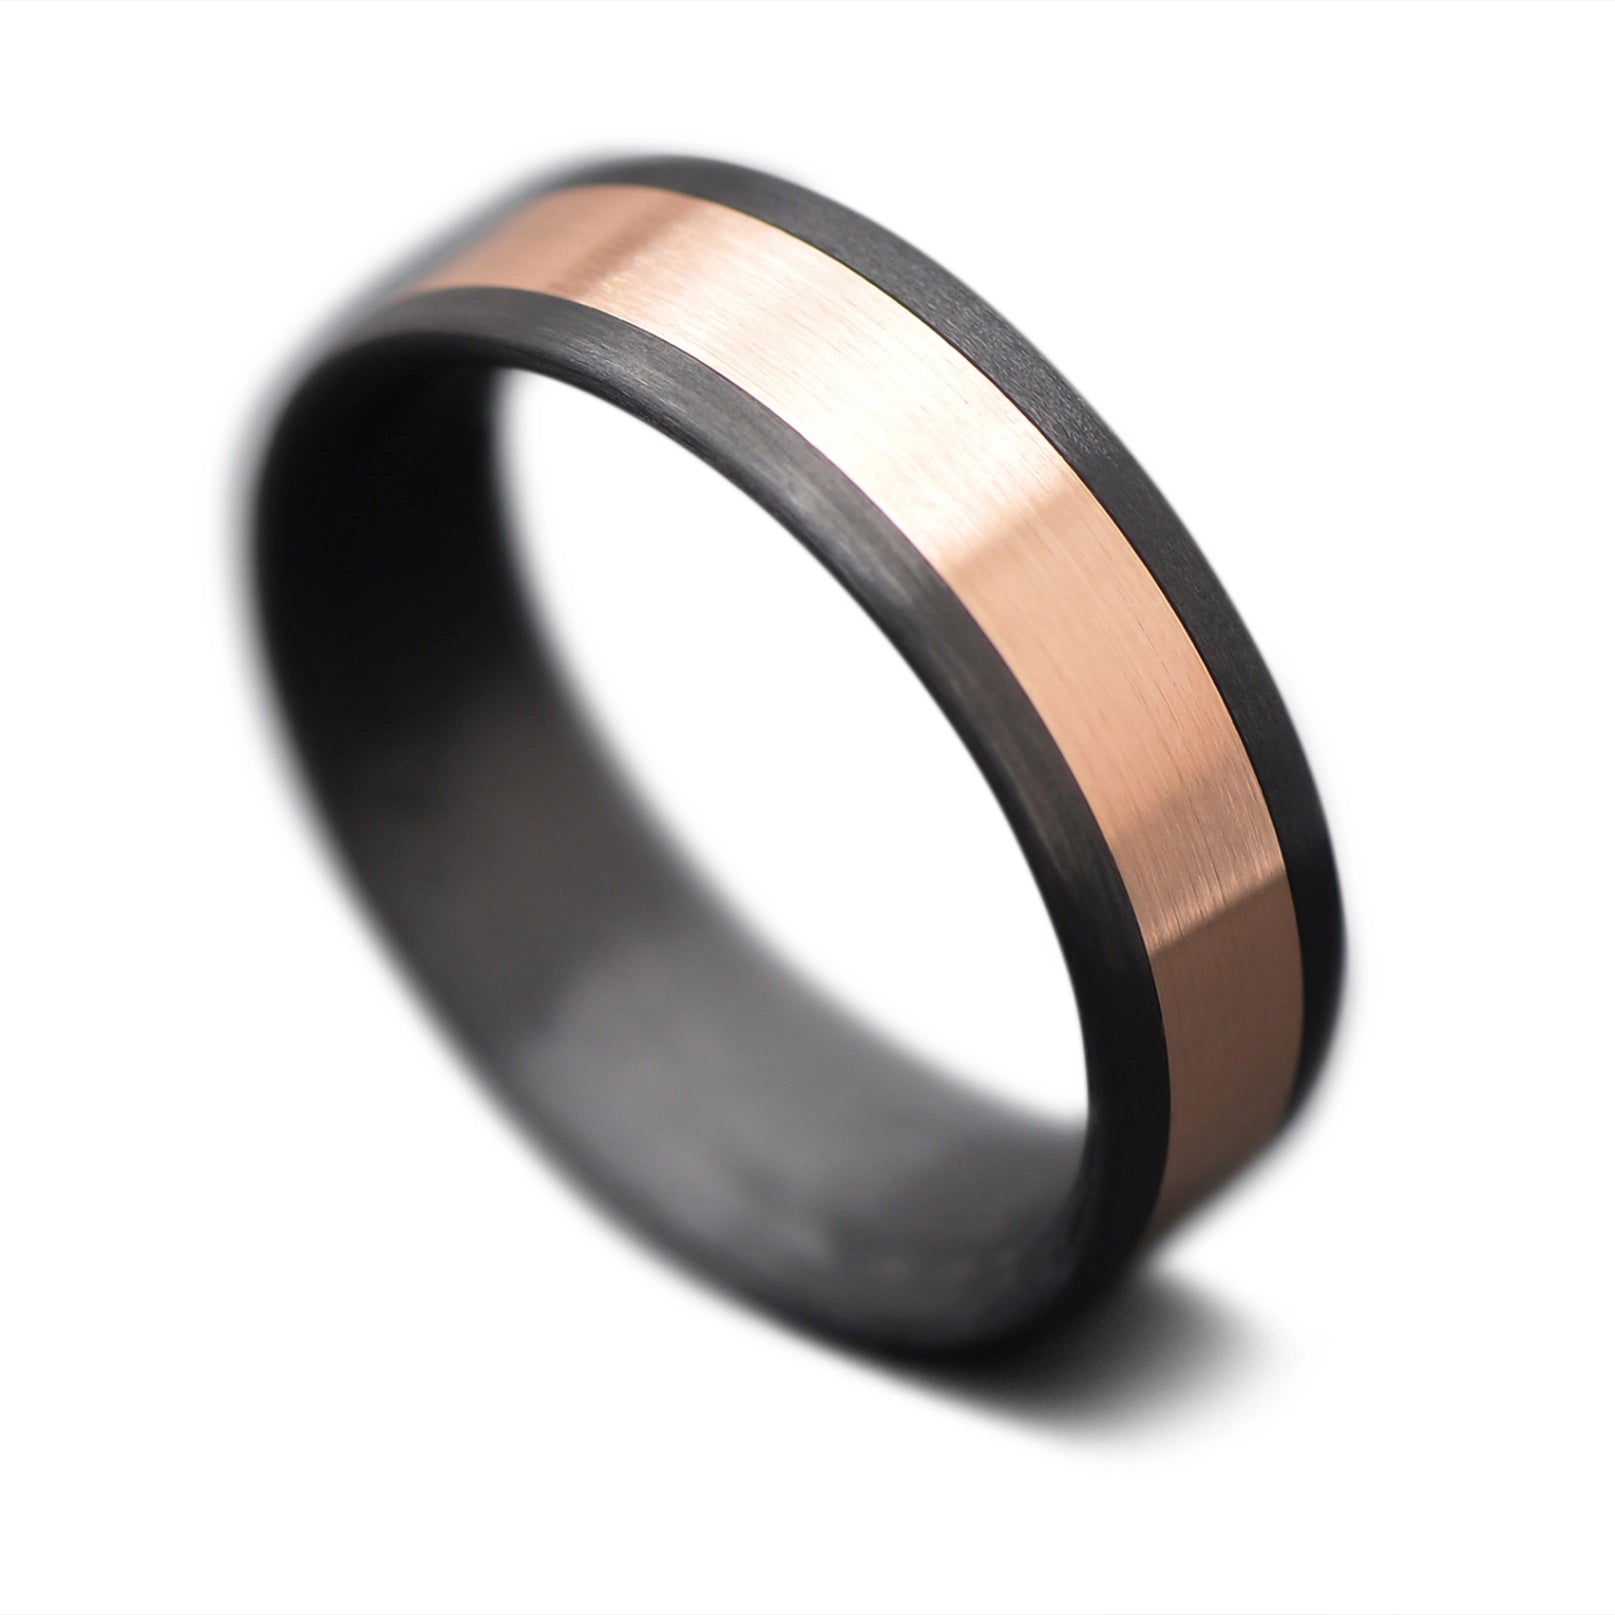 CarbonUni Core Ring with Rose Gold inlay, 7mm -THE NEXUS